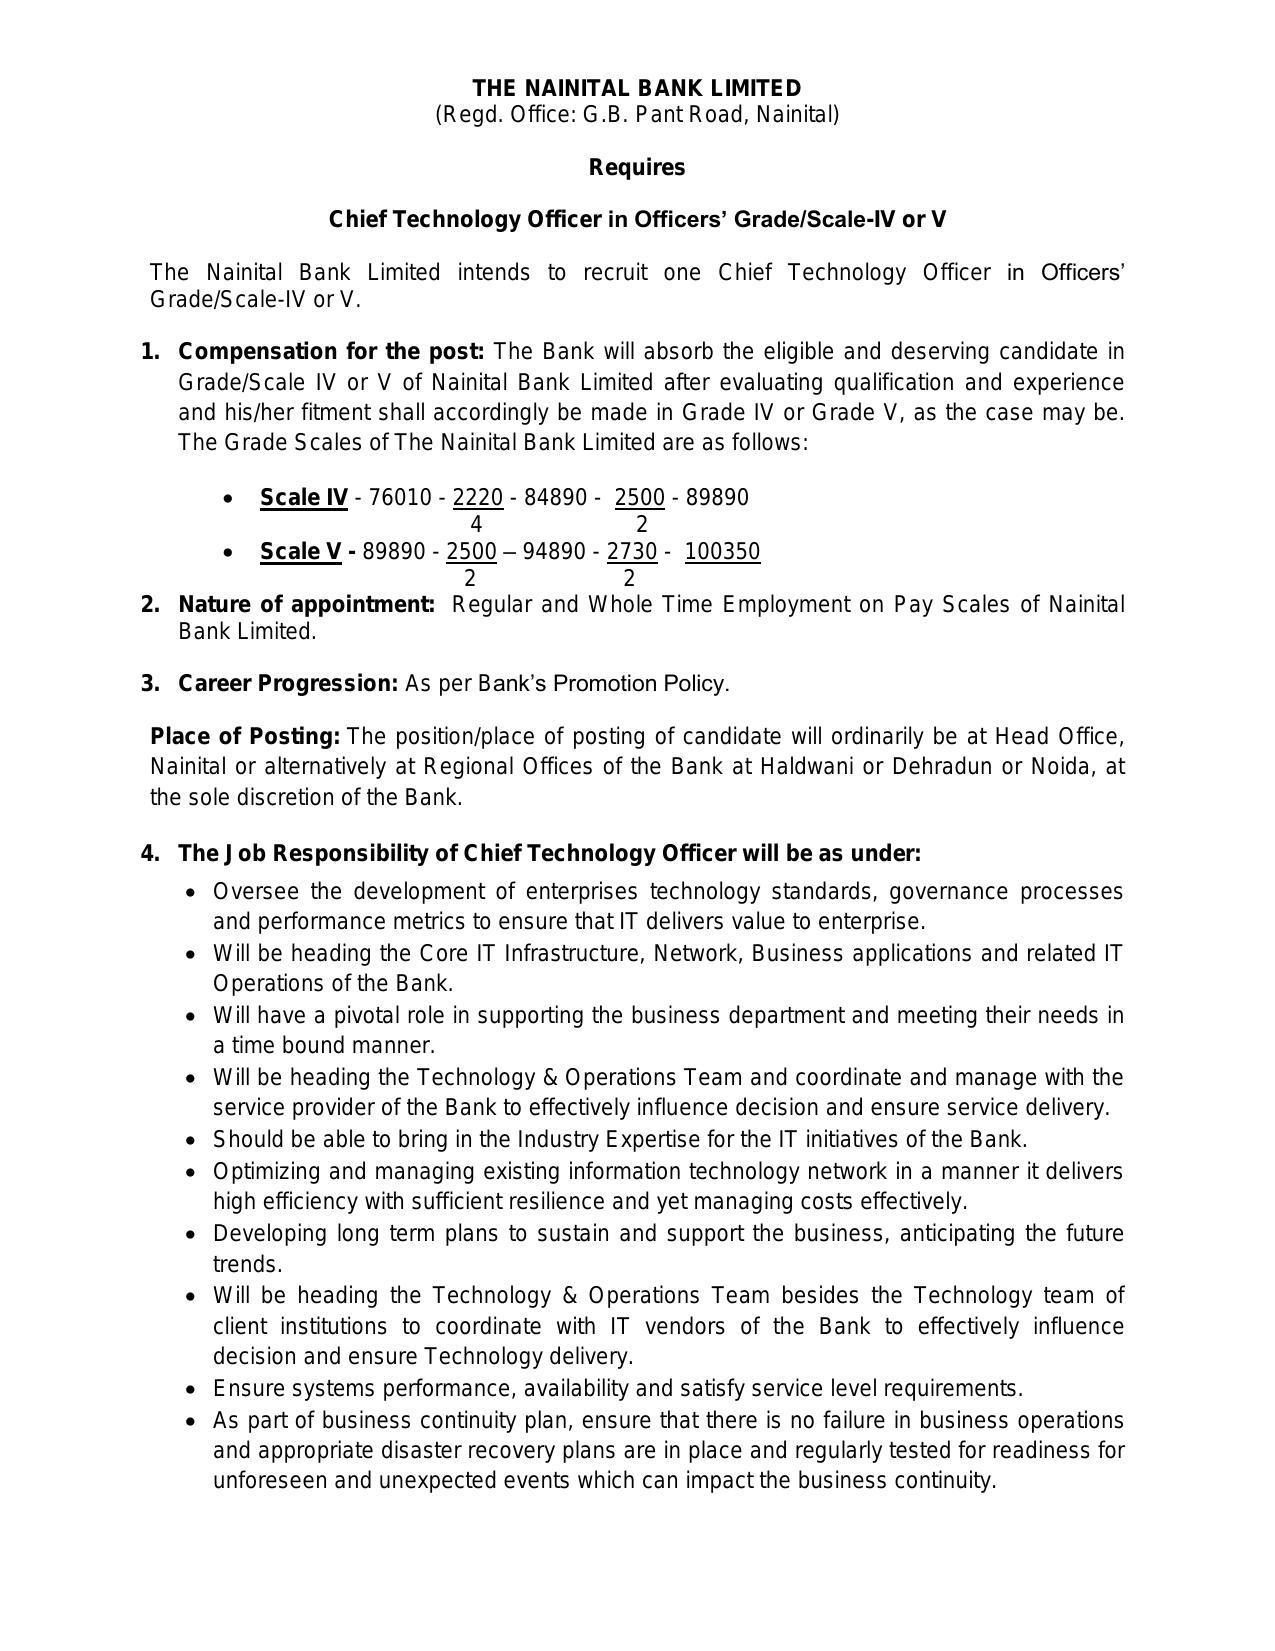 Nainital Bank Invites Application for Chief Technology Officer Recruitment 2022 - Page 3